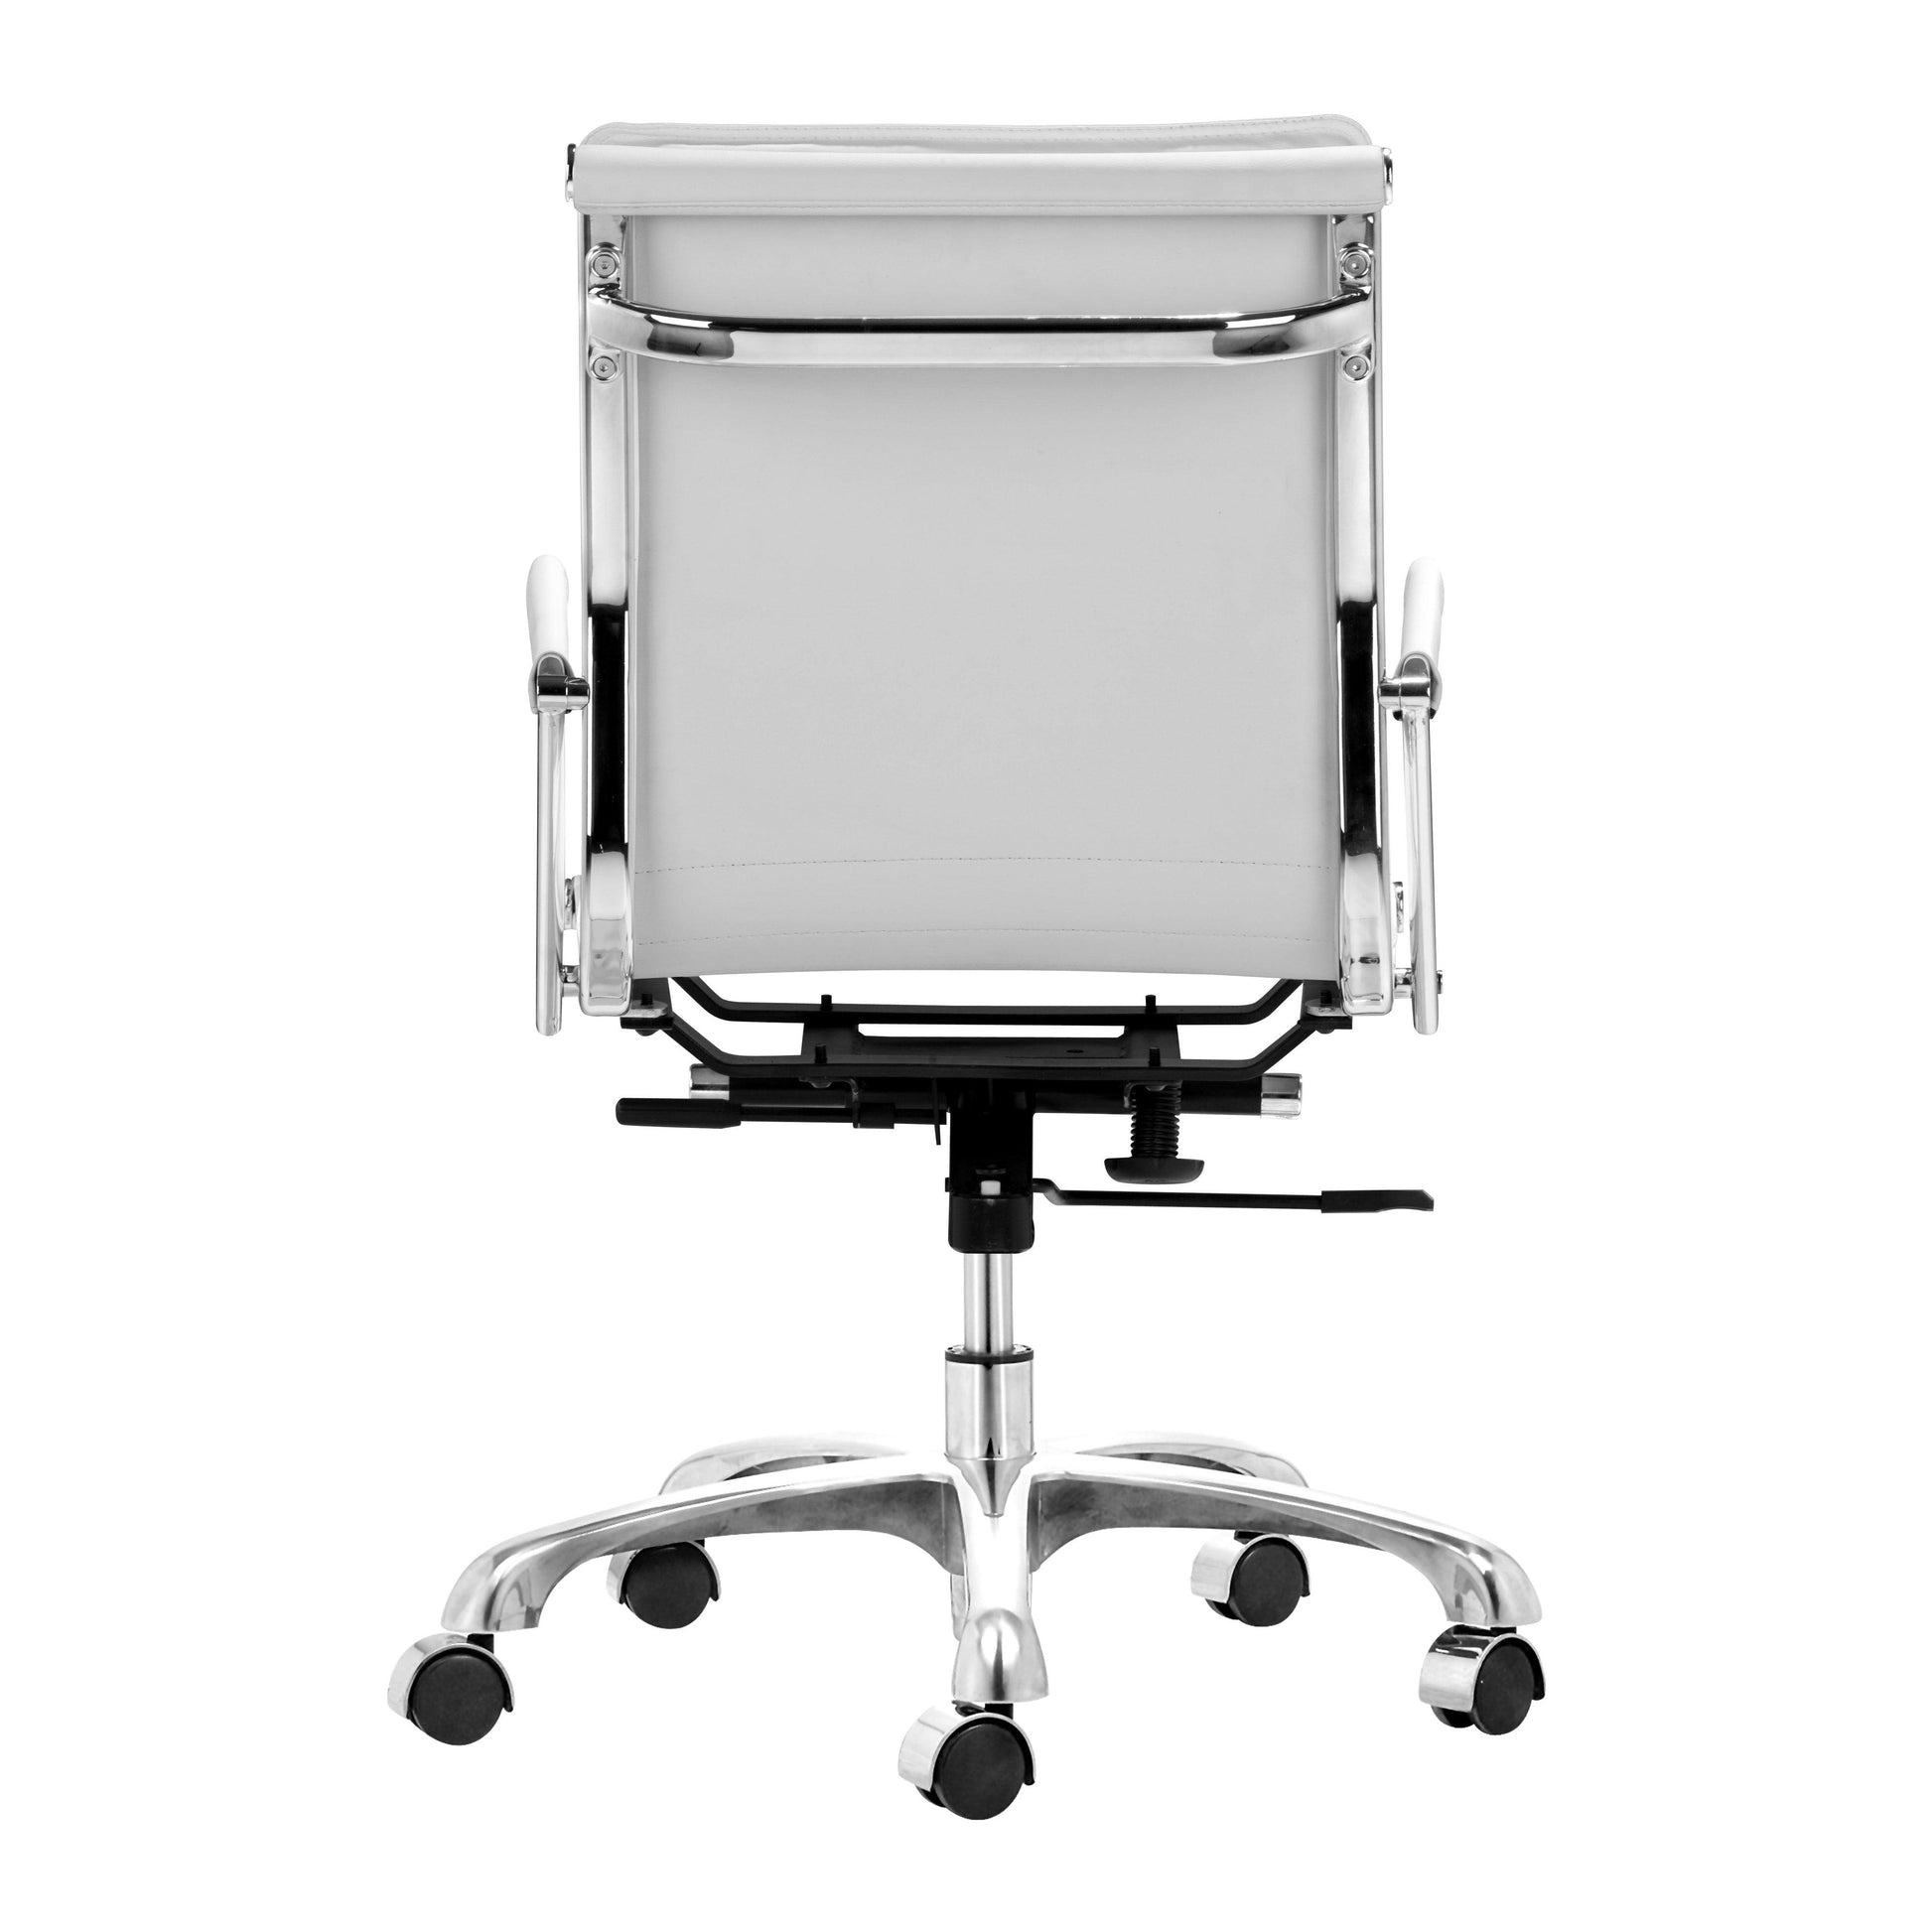 Lider Plus Office Chair White - Sideboards and Things Color_Silver, Color_White, Depth_20-30, Features_Adjustable Height, Finish_Polished, Height_30-40, Materials_Metal, Materials_Upholstery, Metal Type_Aluminum, Metal Type_Steel, Upholstery Type_Leather, Upholstery Type_Vegan Leather, Width_20-30